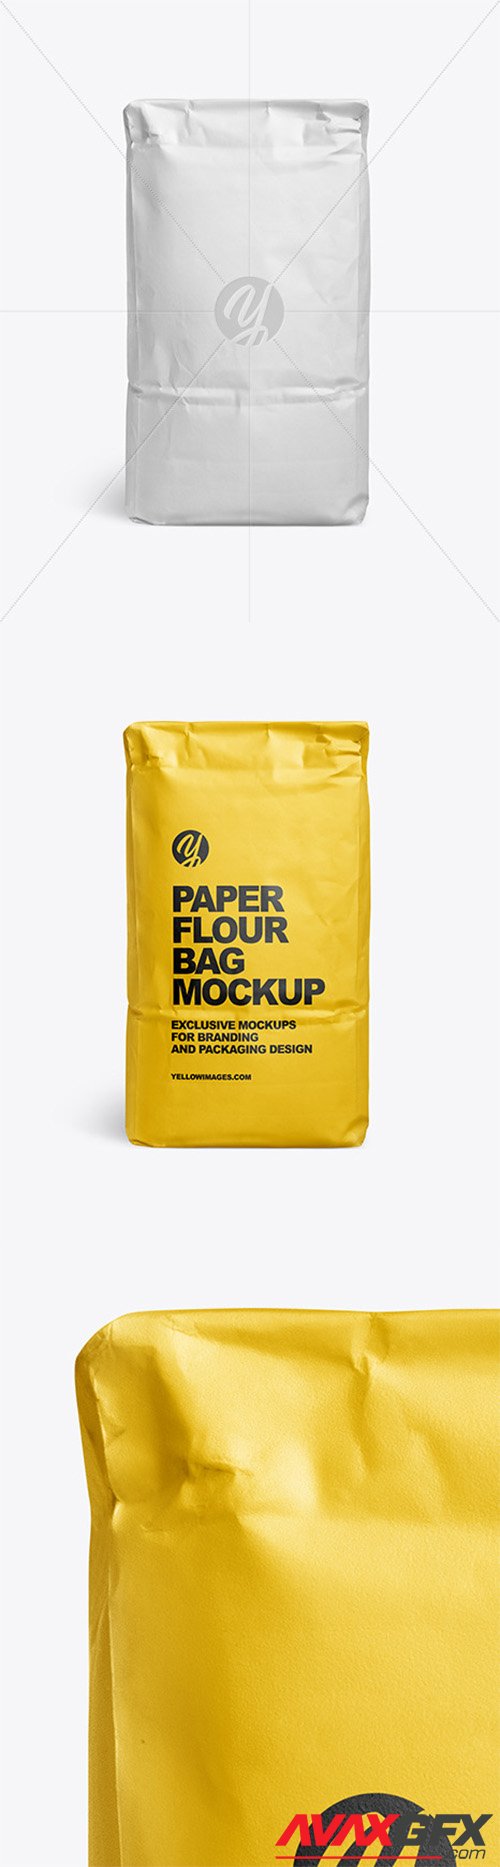 Download Paper Flour Bag Mockup Front View 61238 Avaxgfx All Downloads That You Need In One Place Graphic From Nitroflare Rapidgator Yellowimages Mockups